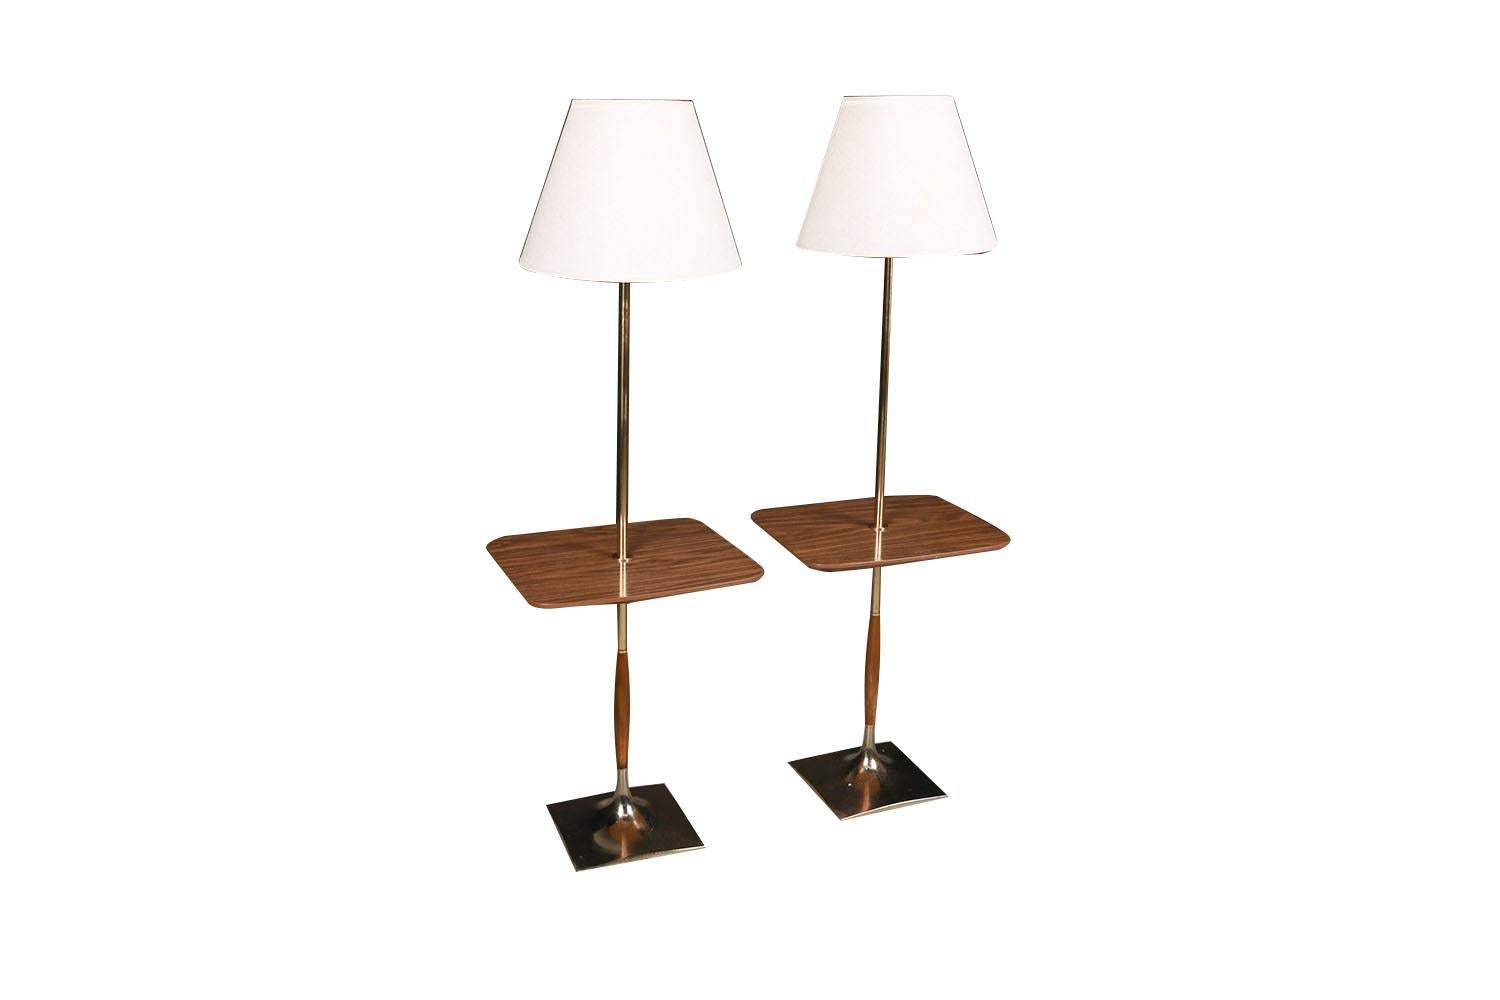 Magnificent pair of Mid-Century Modern walnut and brass table floor lamps circa 1960s, by Laurel Lamp Mfg Co, MCM exquisite craftsmanship features glass diffusers and white shades. They each have central built-in waterproof rectangular wood grain